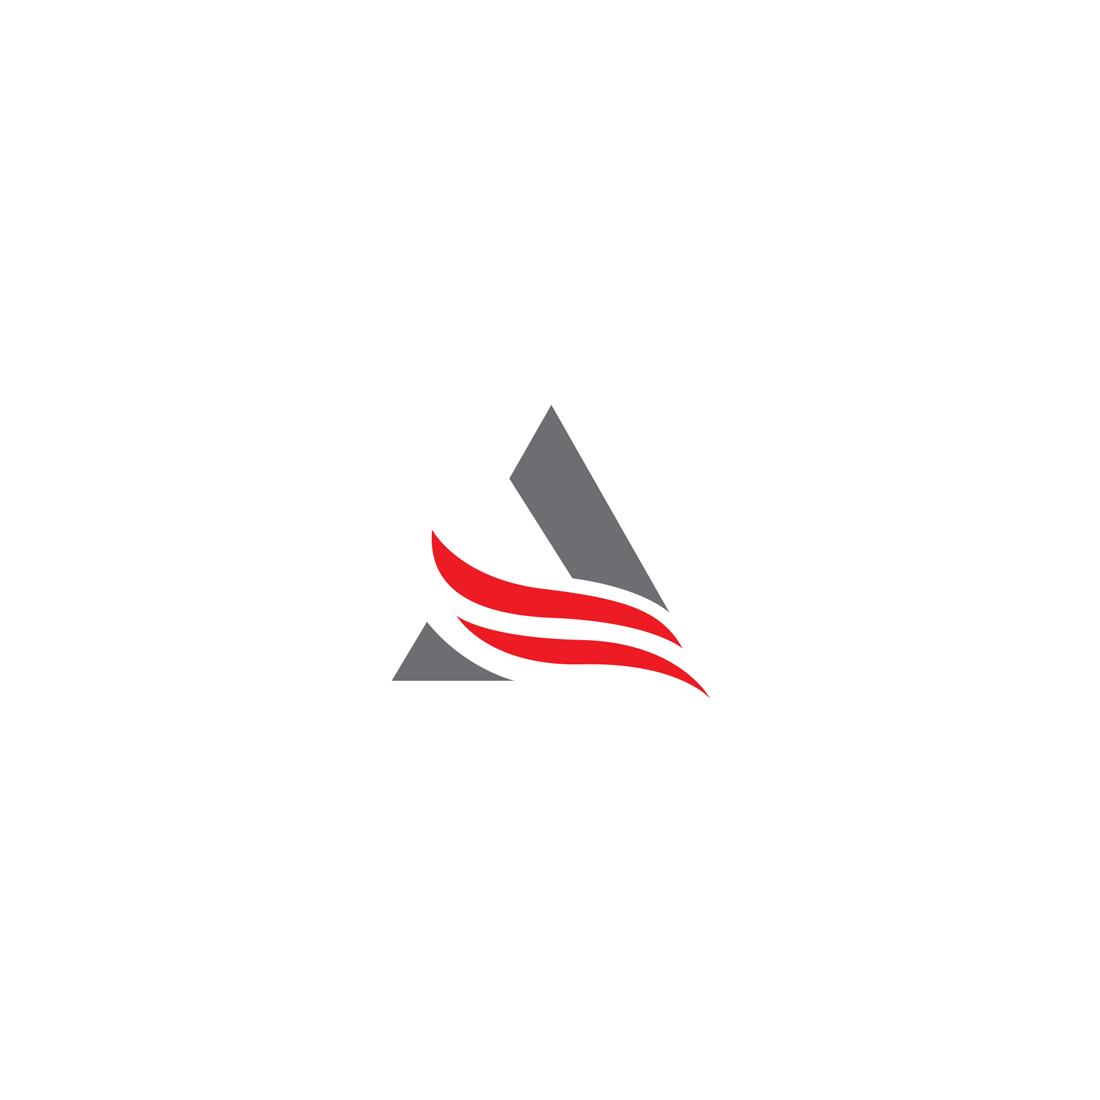 Logo for a company with a red and gray stripe.